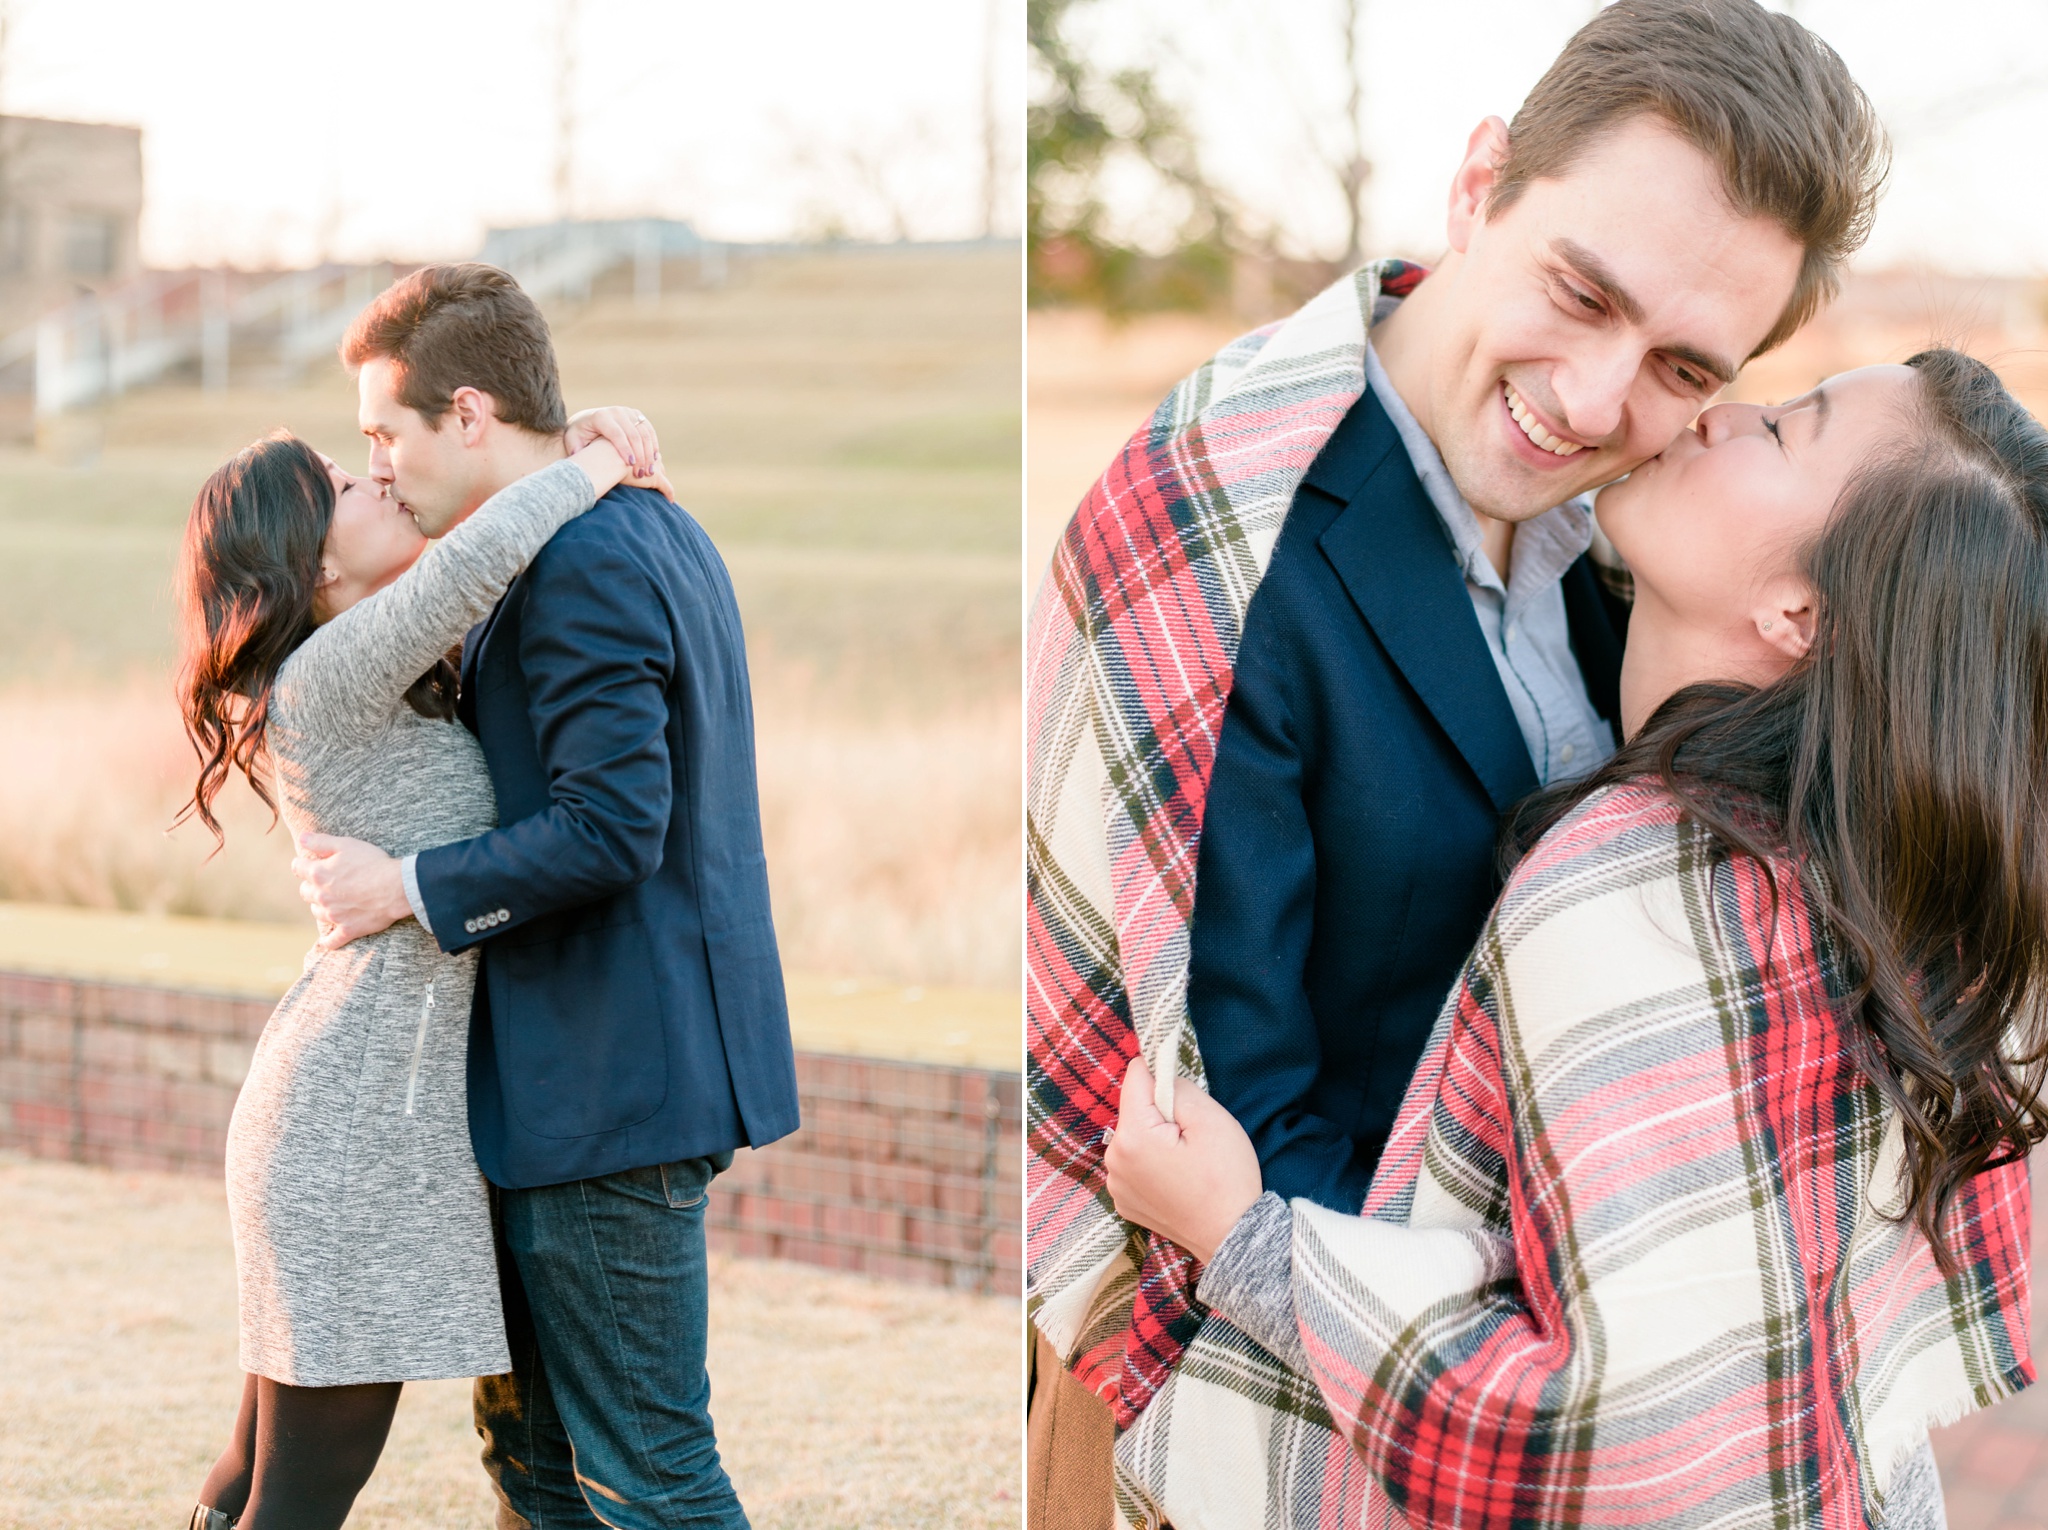 Downtown Nice to Have You in Birmingham Engagement Session| Birmingham Alabama Wedding Photographers_0013.jpg